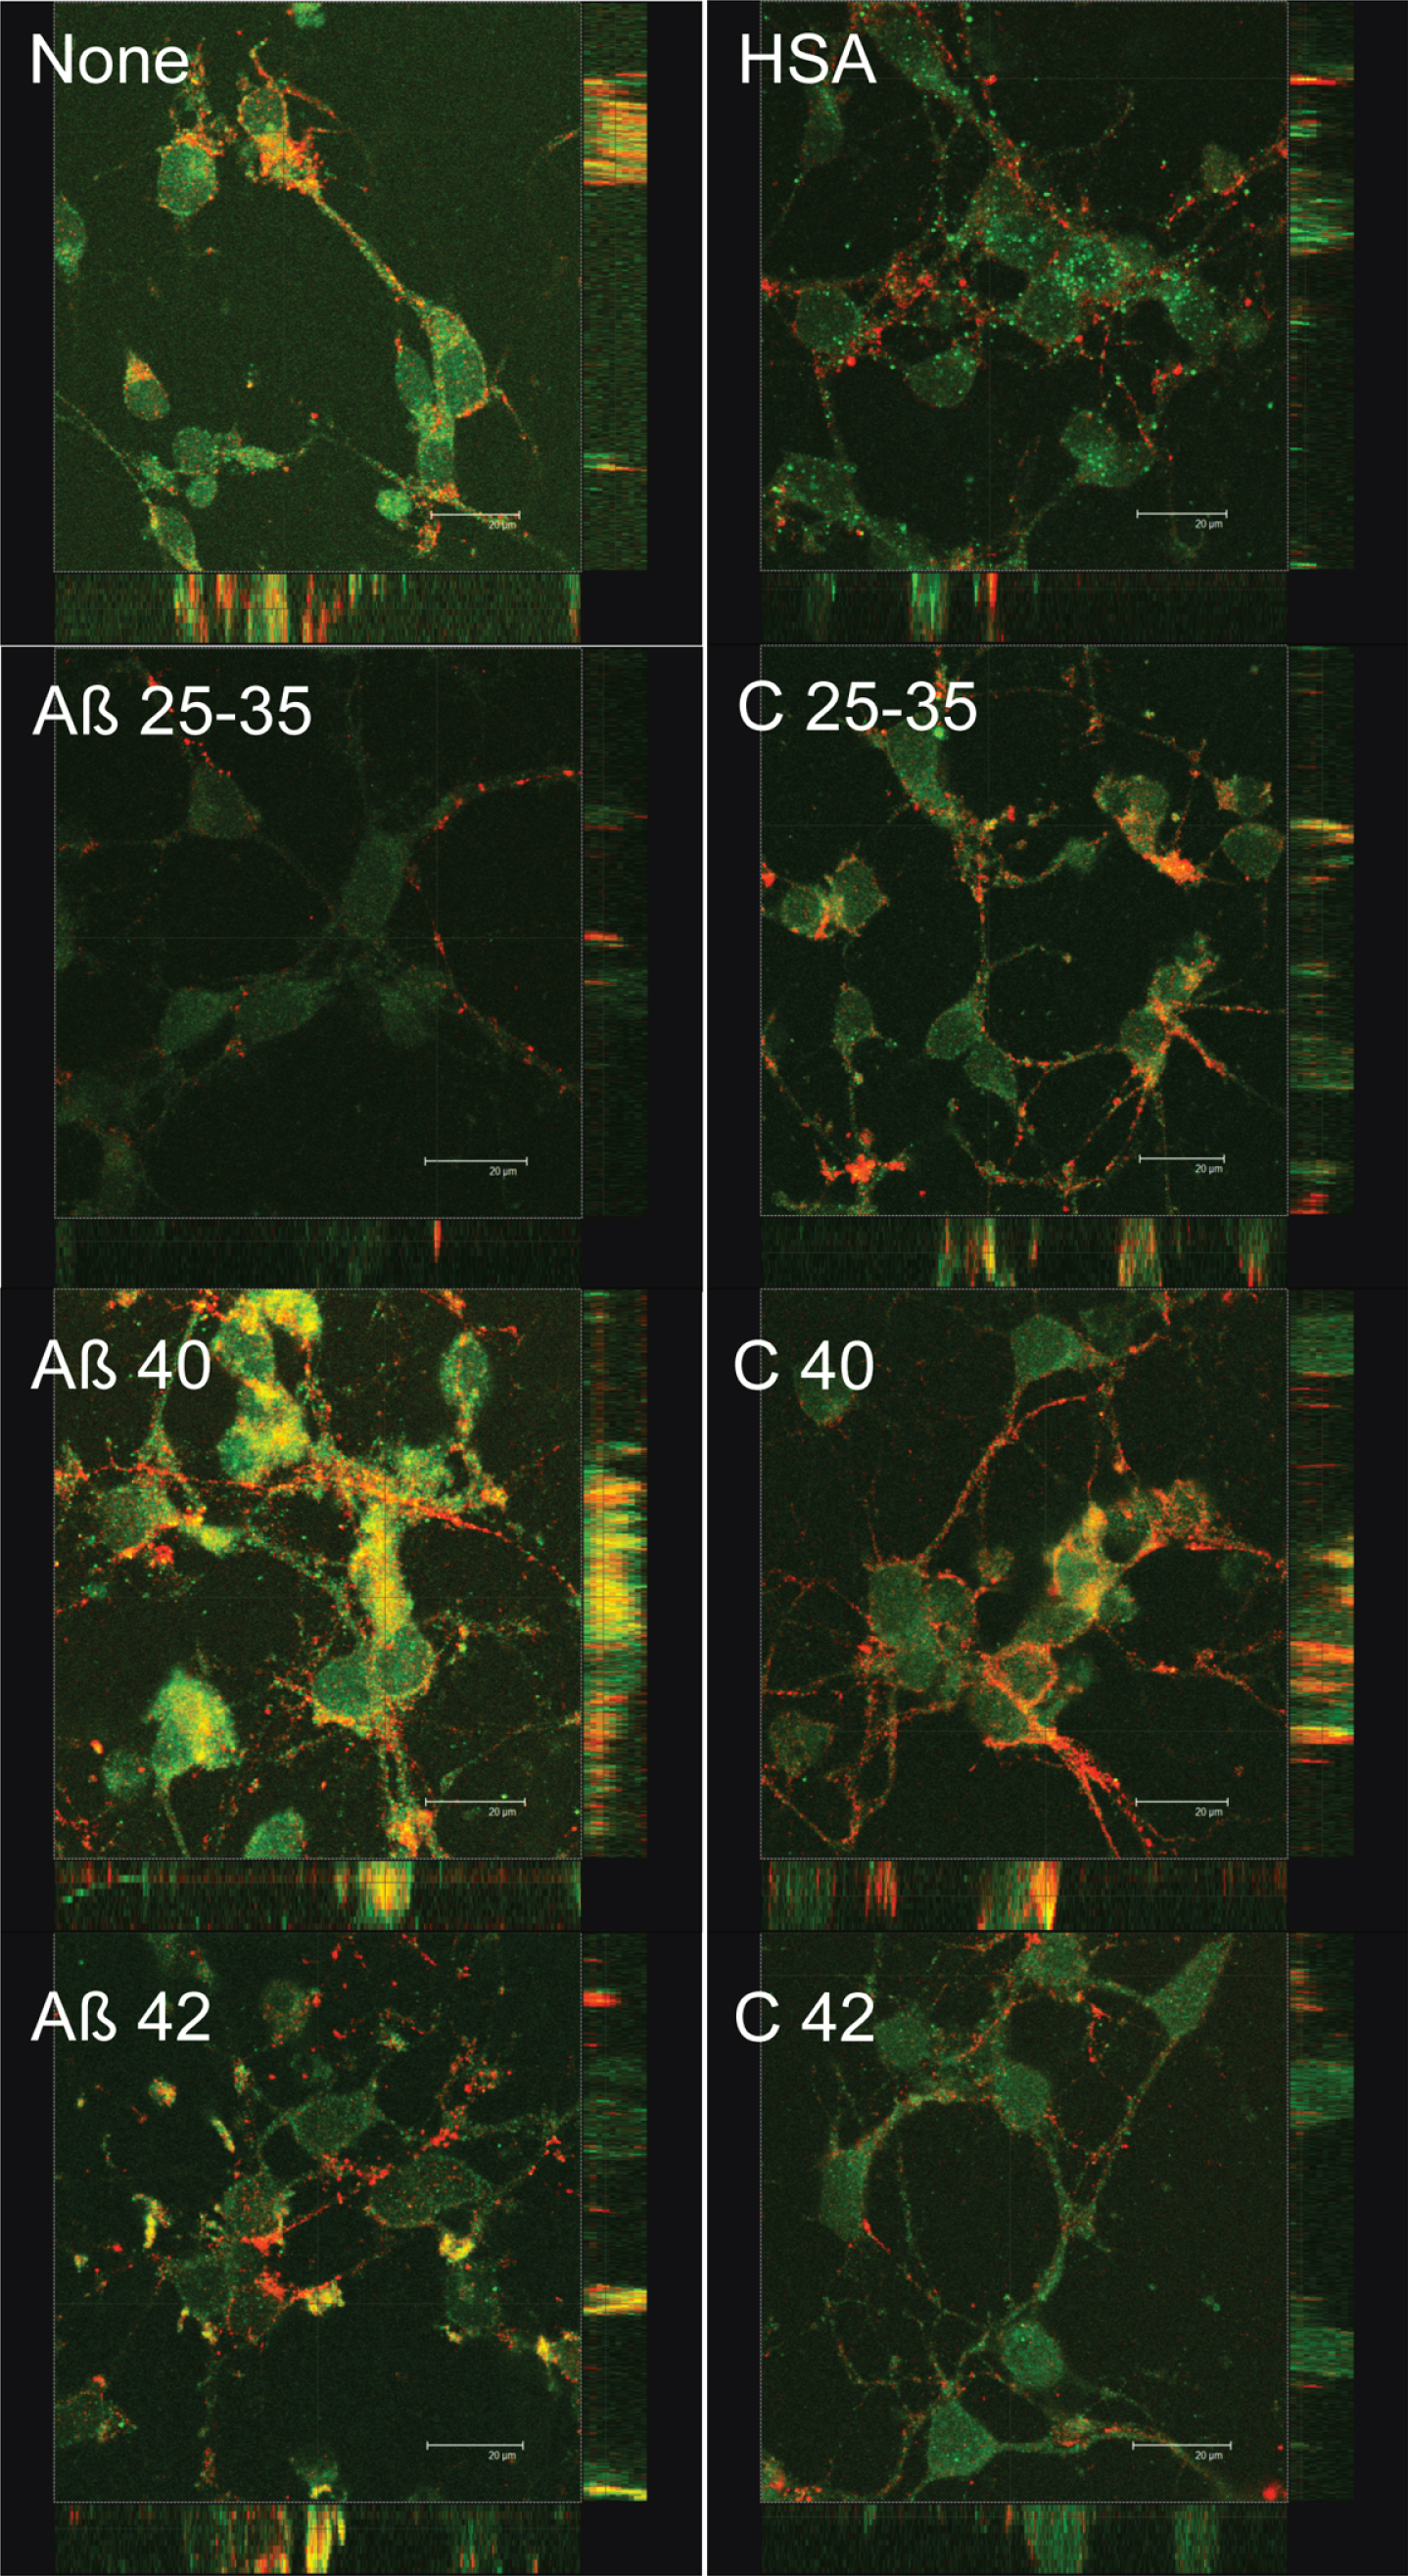 Effect of amyloid-beta peptides on PSD-95 and synaptotagmin localization. Neurons in primary culture (4 DIV) were incubated for 2 h in Hanks medium in the absence or the presence of 30 μM Aβ25-35, Aβ40, Aβ42, HSA, or HSA-Aβ complexes (C 25–35, C 40, C 42). After incubation, cells were fixed and immunocytochemistry against PSD-95 (in green) and against synaptotagmin (in red) was carried out. Images were taken using confocal microscopy. Orthogonal projections along the z-axis of the images are shown at the bottom and right. Scale bar: 20 μM